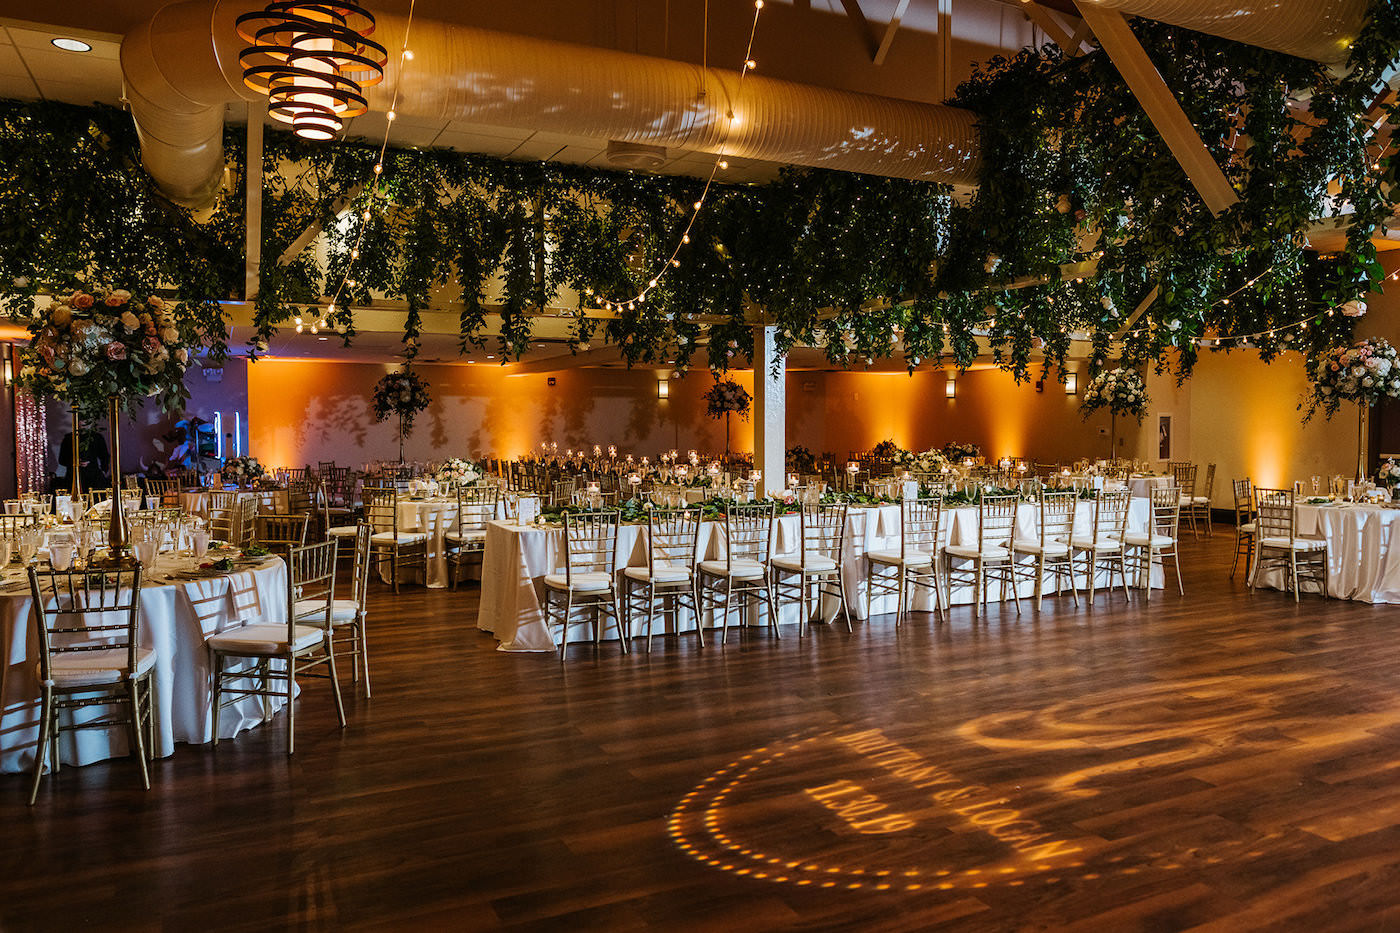 St. Pete Garden Wedding Indoor Reception with Amber Gold Uplighting and Wedding Ceiling Floral Installment with Greenery and Blush Pink and White Roses and Canopy String Lights | Monogram Dance Floor Gobo | Reception Table with White Linens and Gold Chiavari Chairs | Tampa Wedding Rentals A Chair Affair